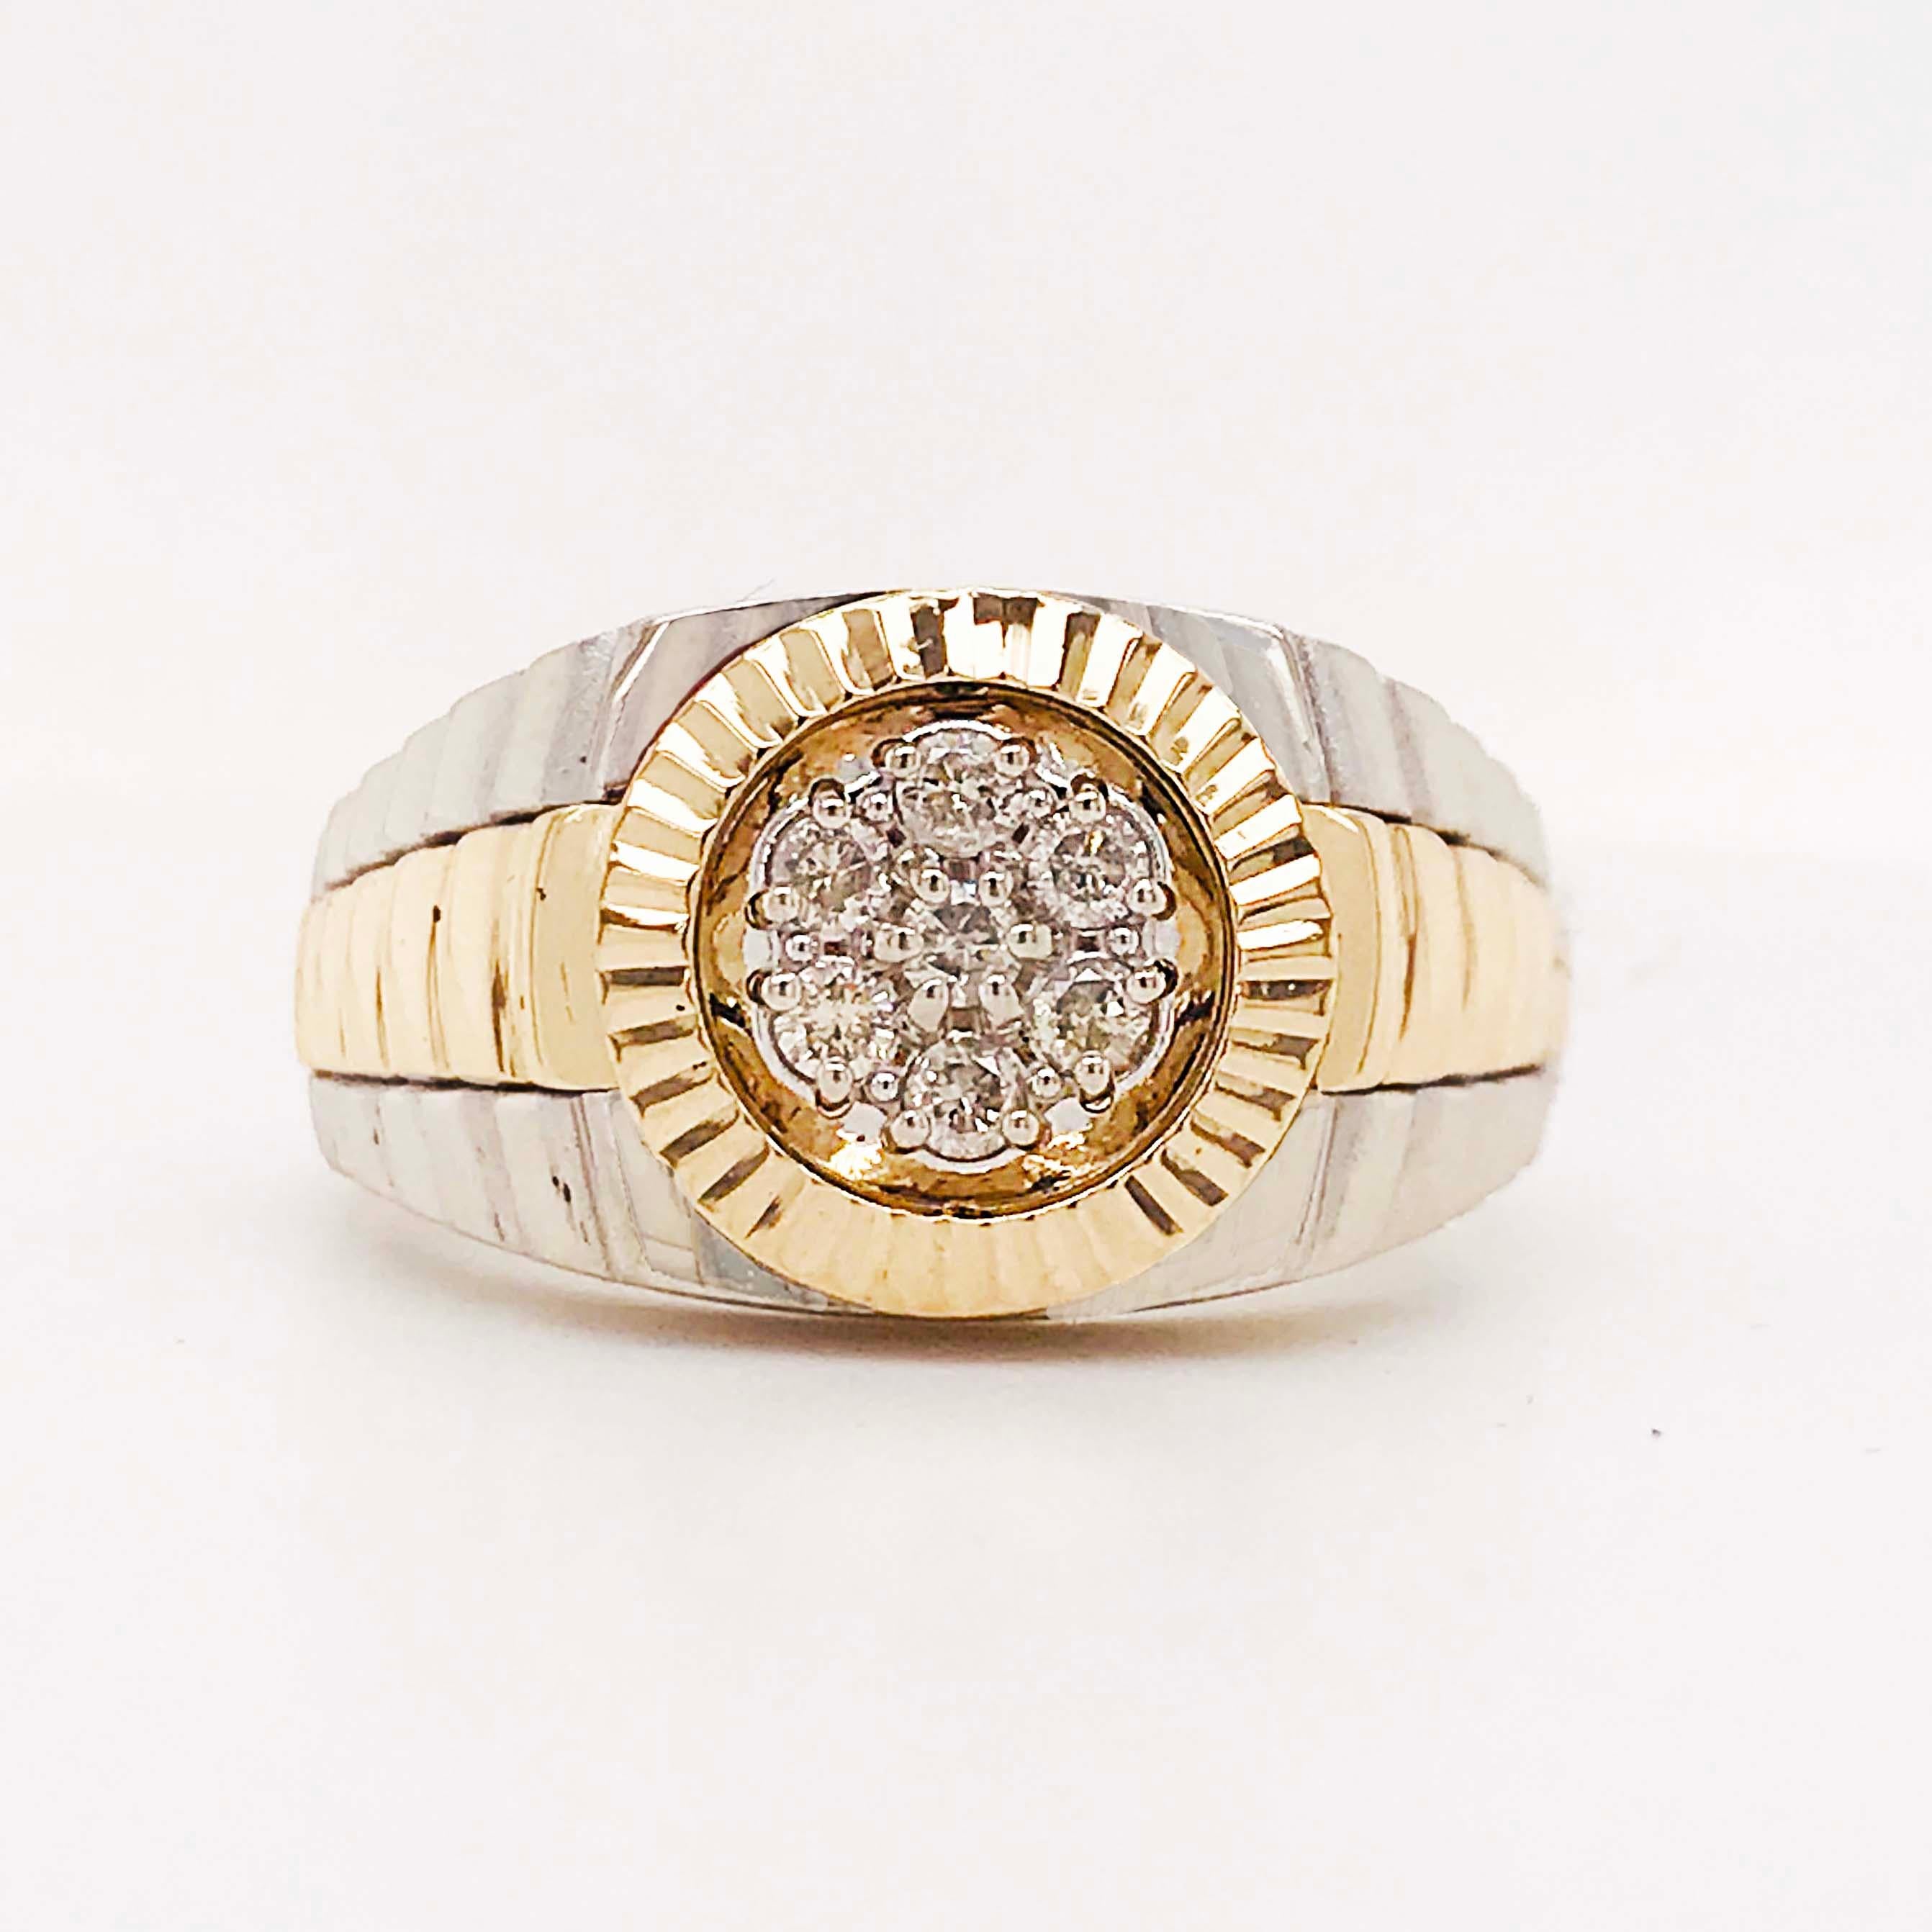 Luxury Look Alike Men's Ring! This Look-alike watch ring is a solid 14k gold ring with a two-tone Diamond watch design that resembles a luxury watch, like Rolex. The ring is designed to look like his favorite watch! With a diamond cluster center and